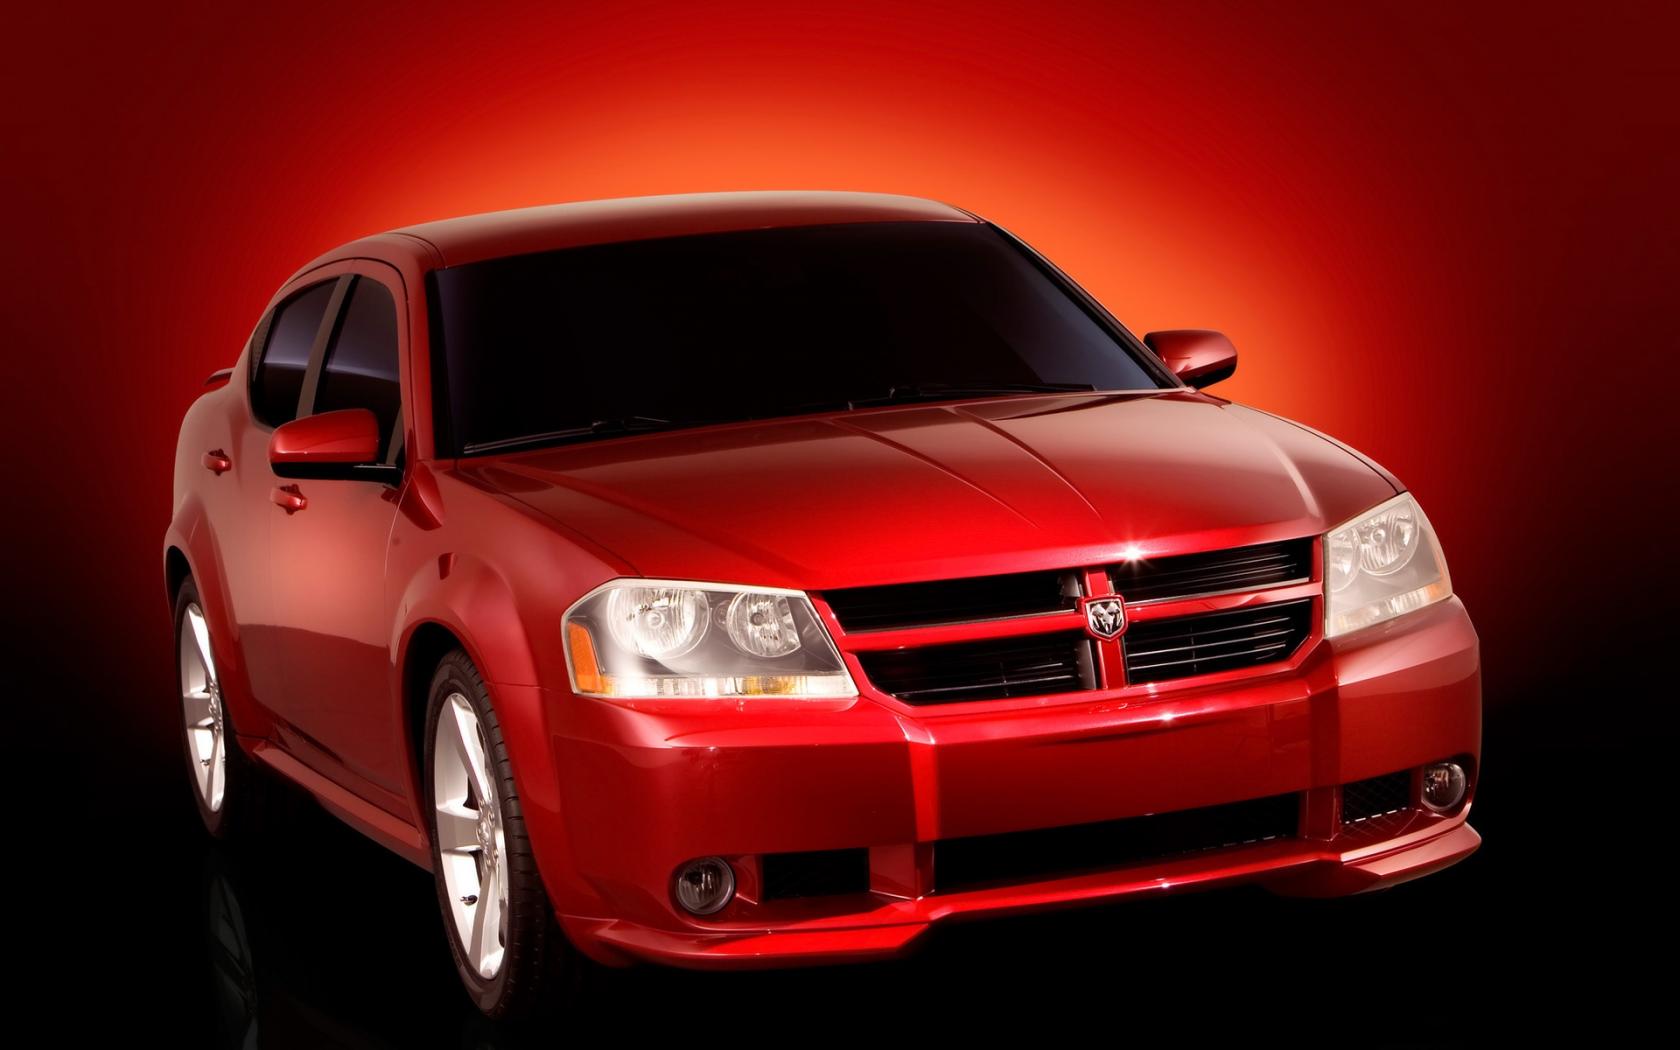 2006 Dodge Avenger Concept Front Angle 1680x1050